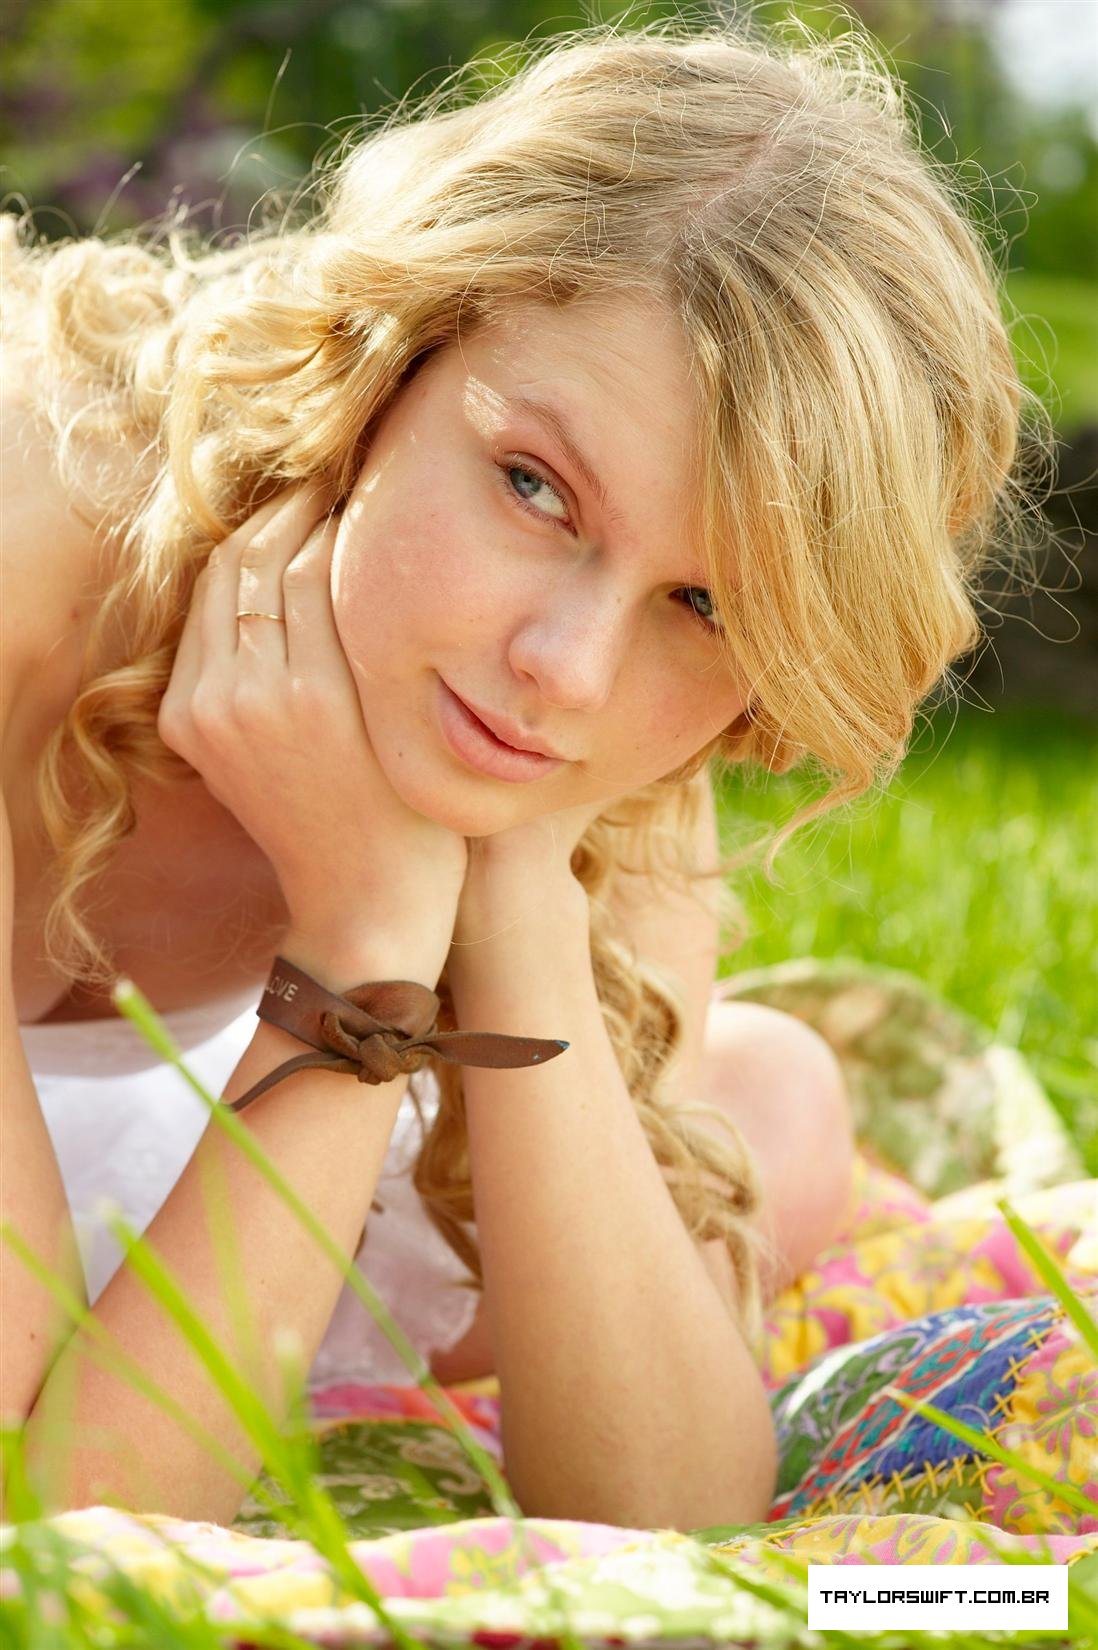 Taylor Swift without makeup picture 3 of 12